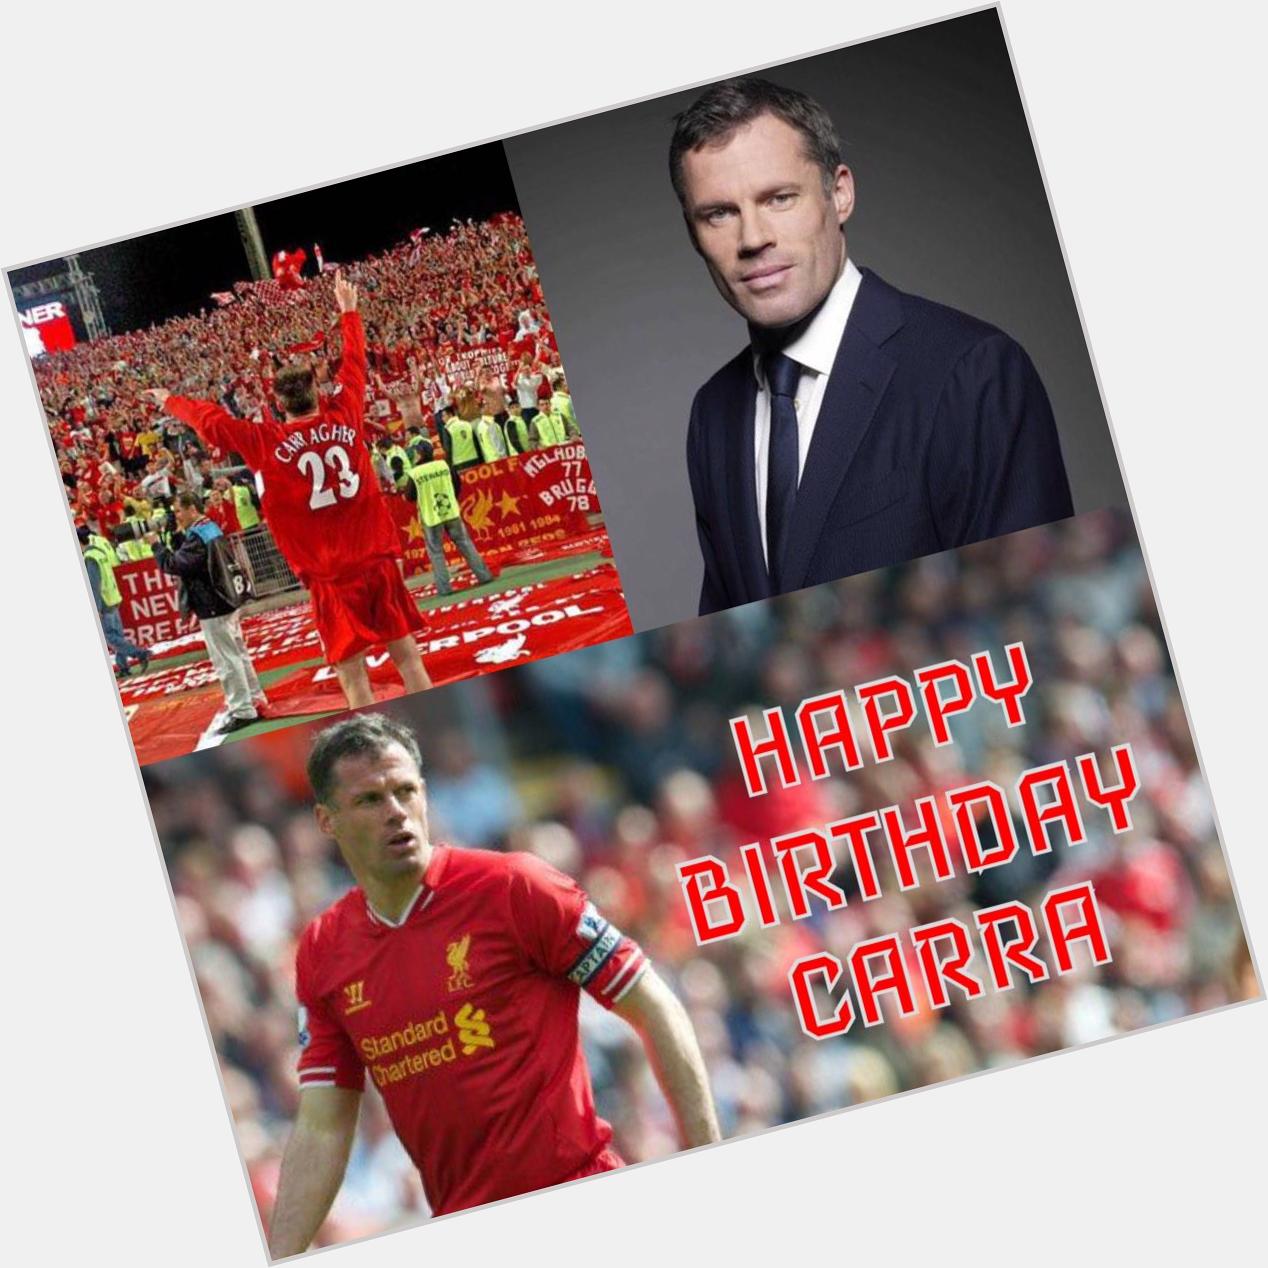 Happy birthday to Liverpool Legend and best pundit on Sky Sports Jamie Carragher   